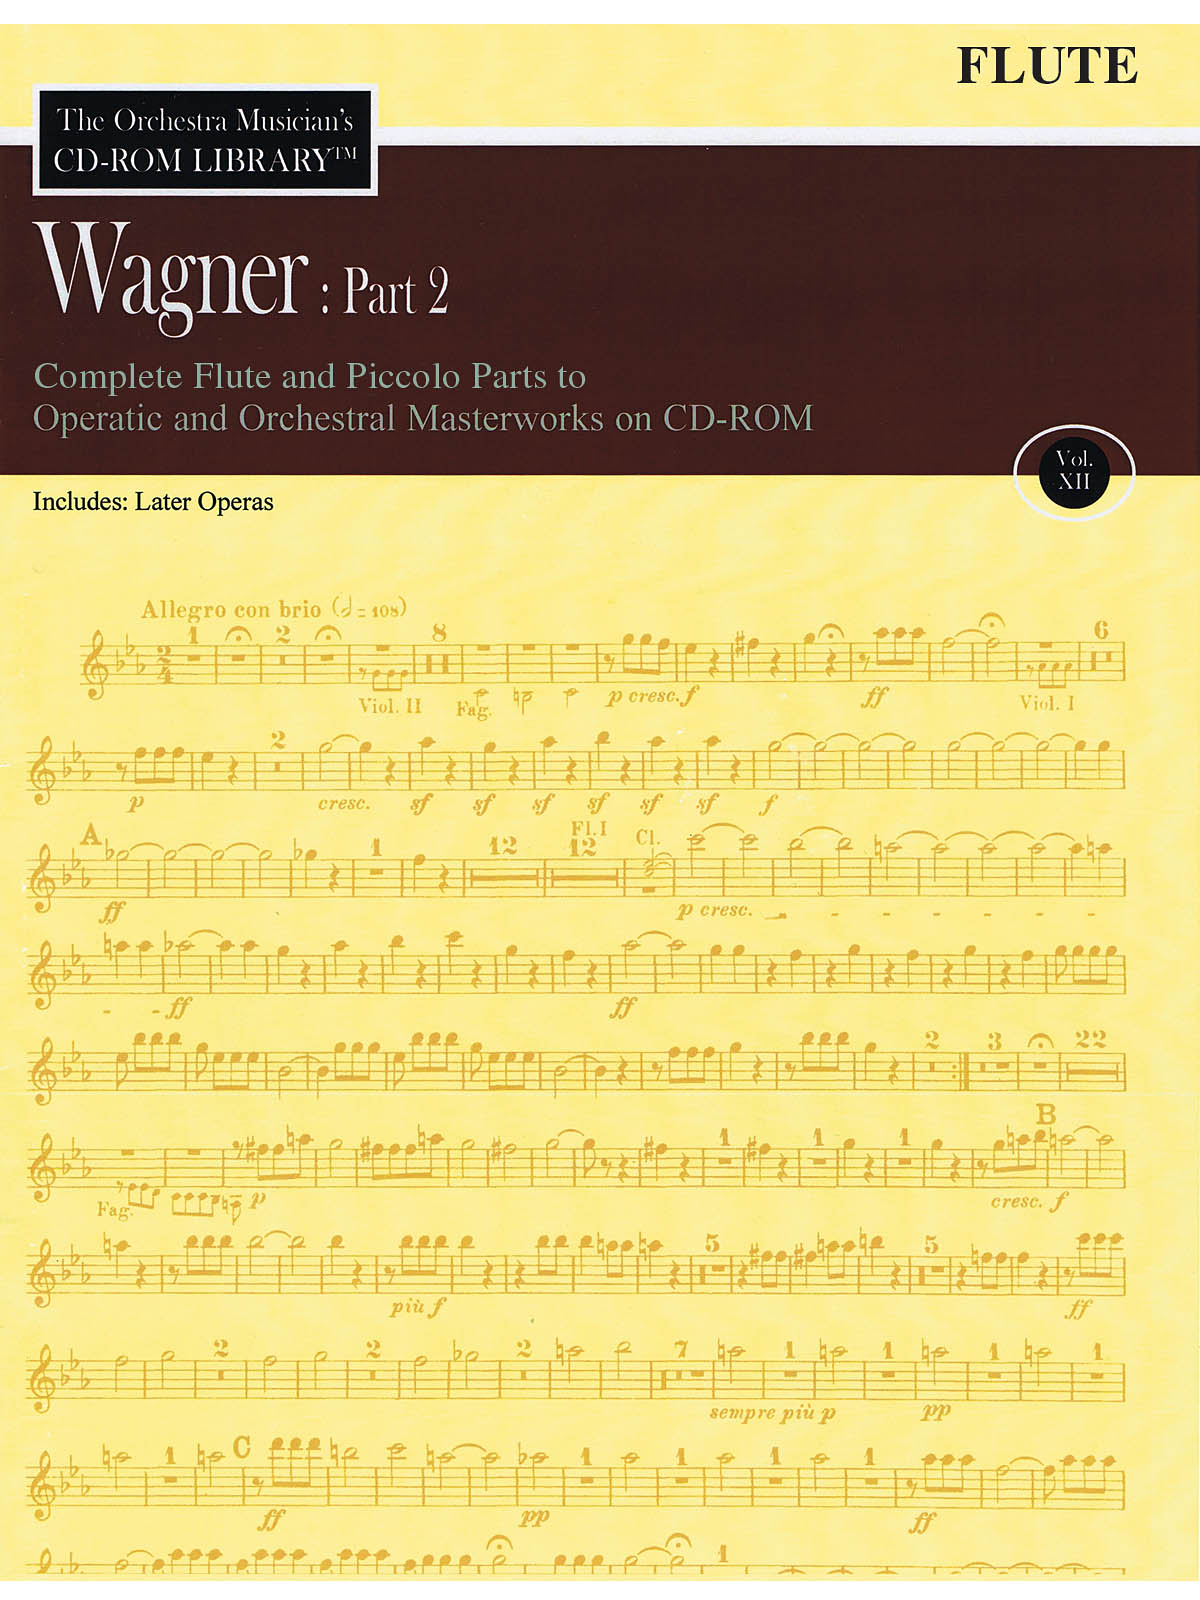 Wagner: Part 2 – Volume 12(The Orchestra Musician’s CD-ROM Library – Flute)